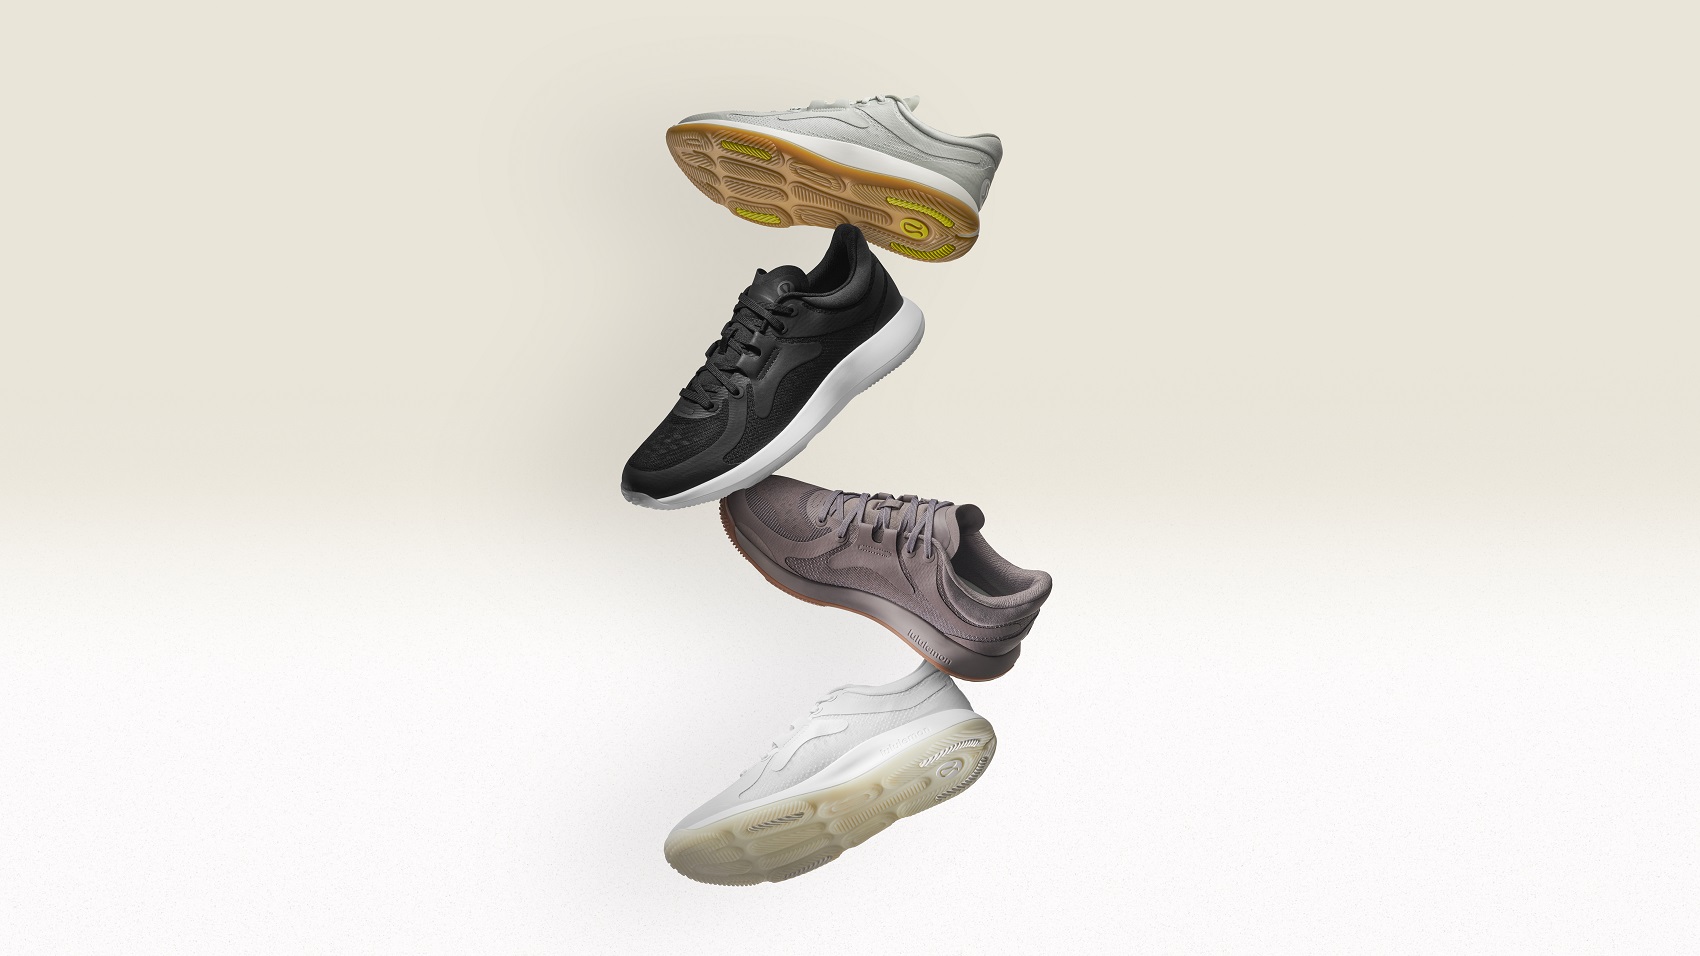 lululemon Expands Its Footwear Offerings with New Casual and Performance  Styles, Including the Brand's First-Ever Men's Collection